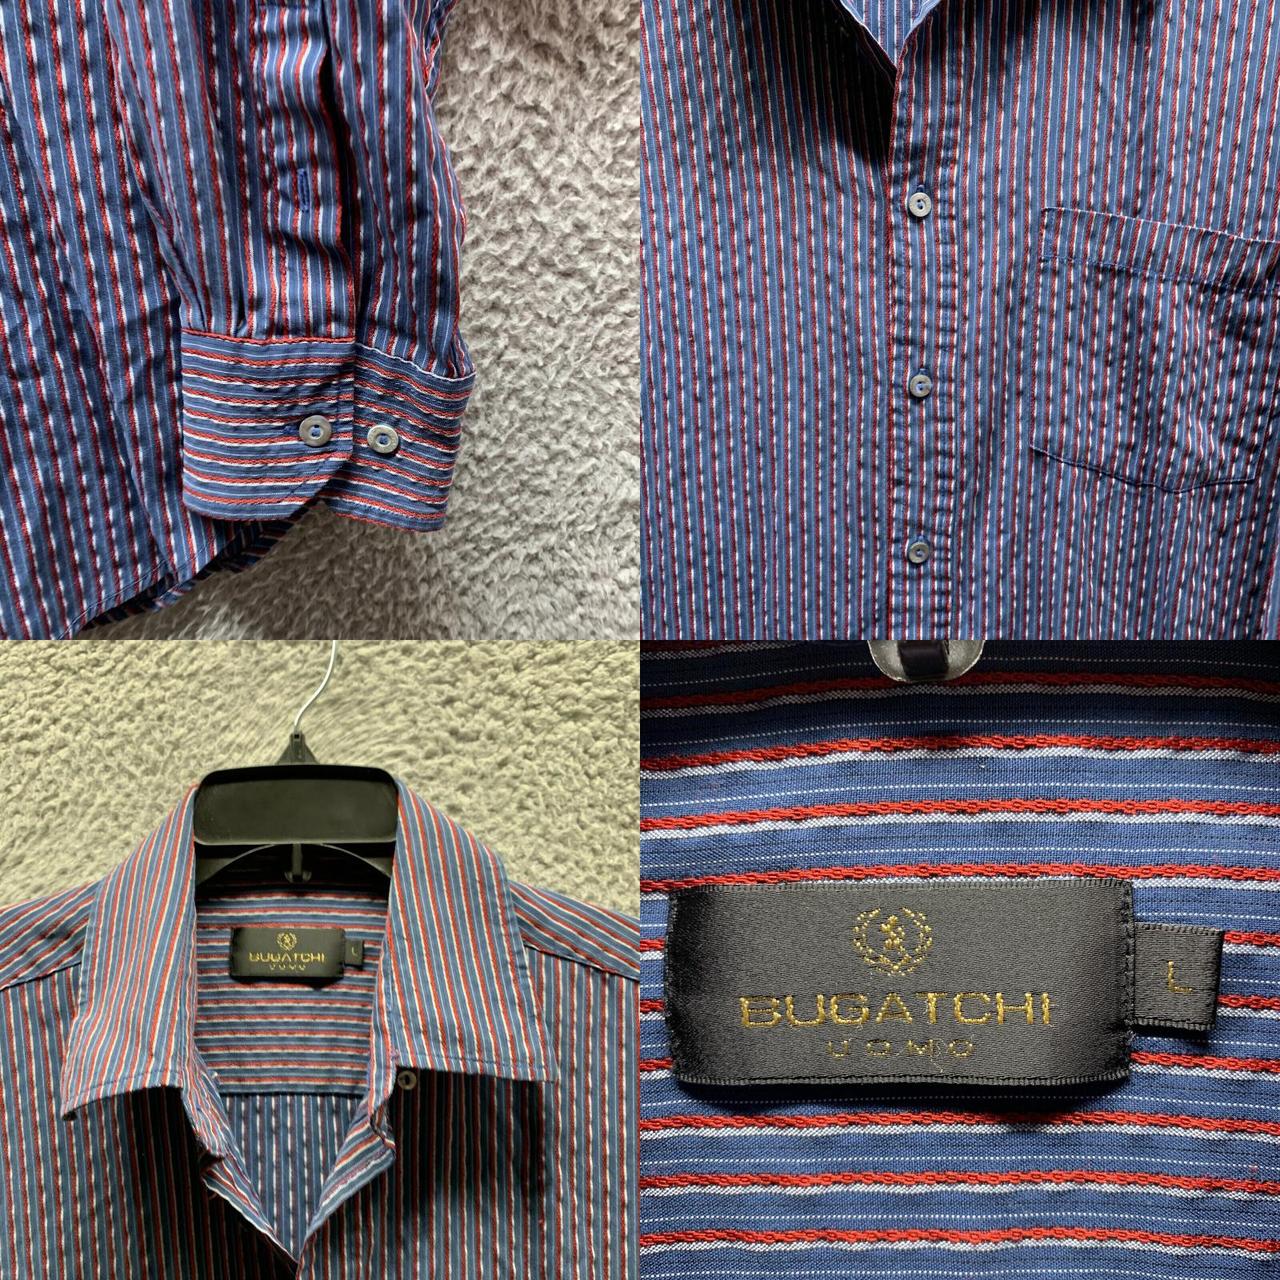 Bugatchi Men's Blue and Red Shirt (4)